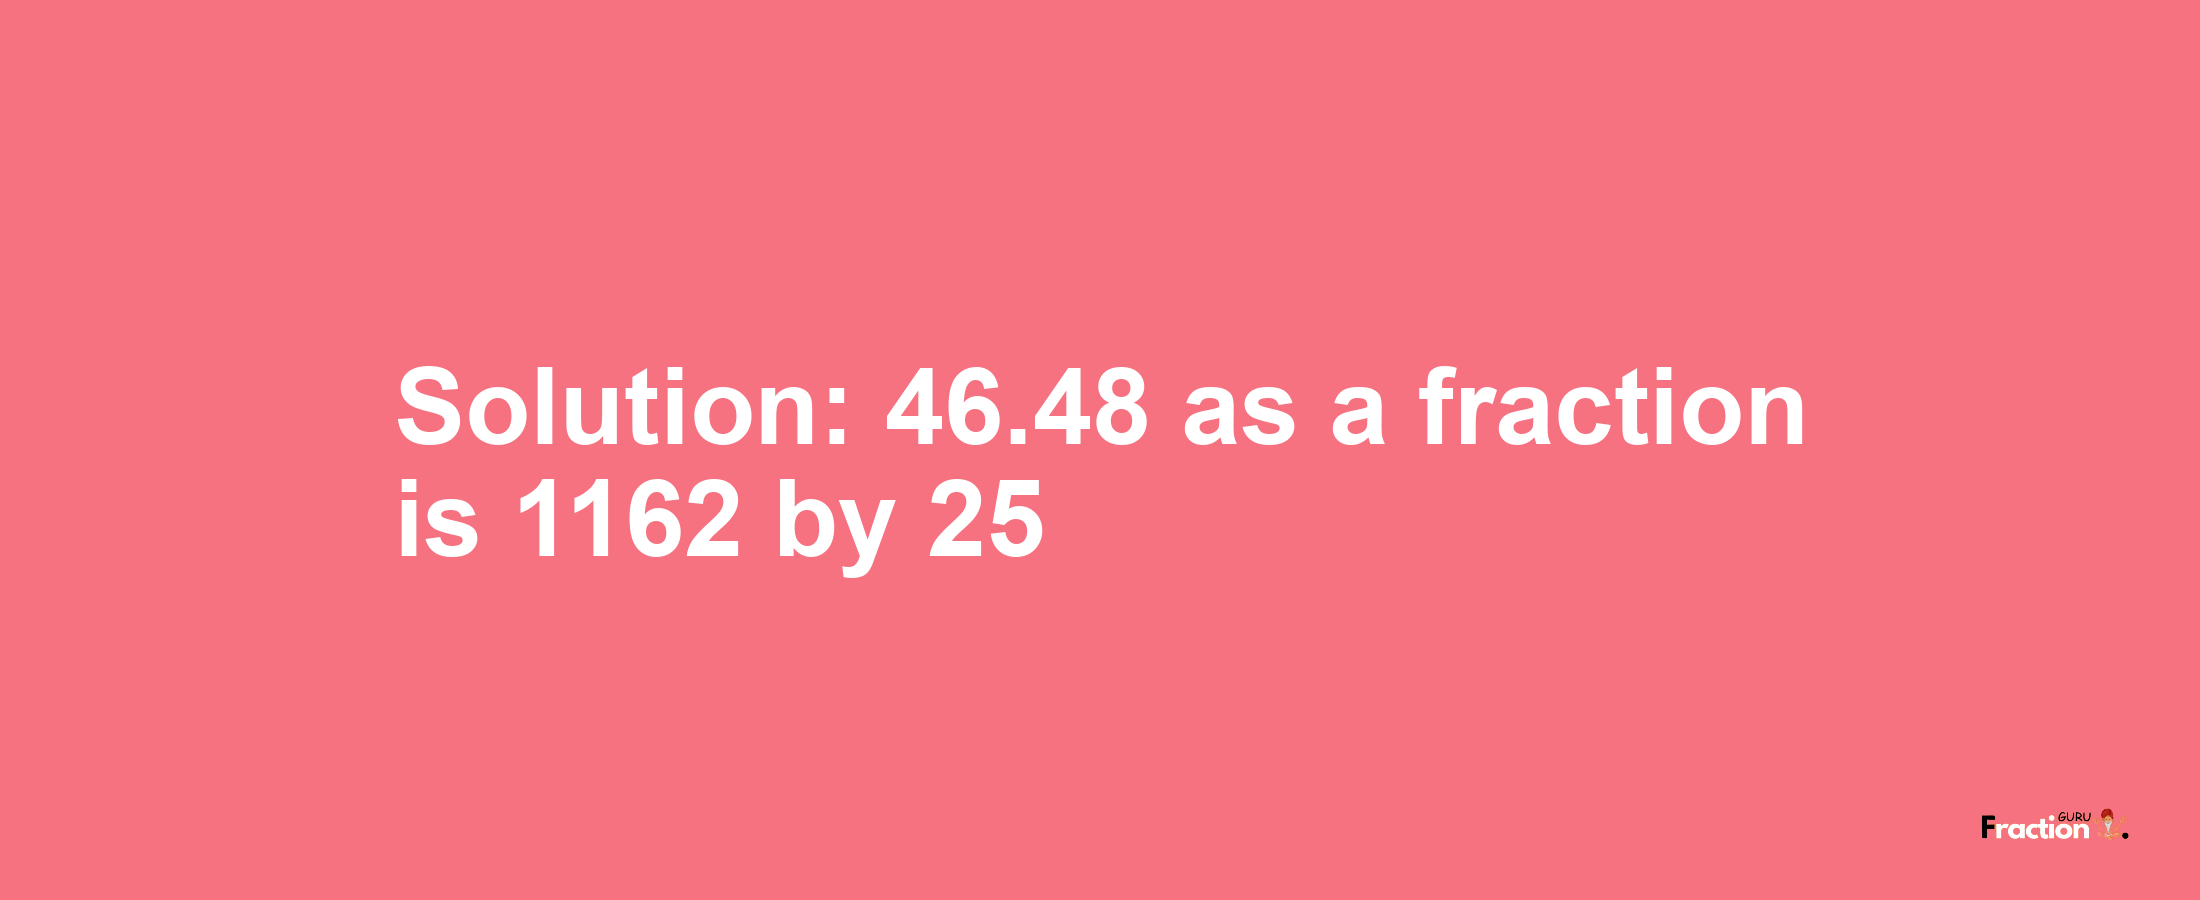 Solution:46.48 as a fraction is 1162/25